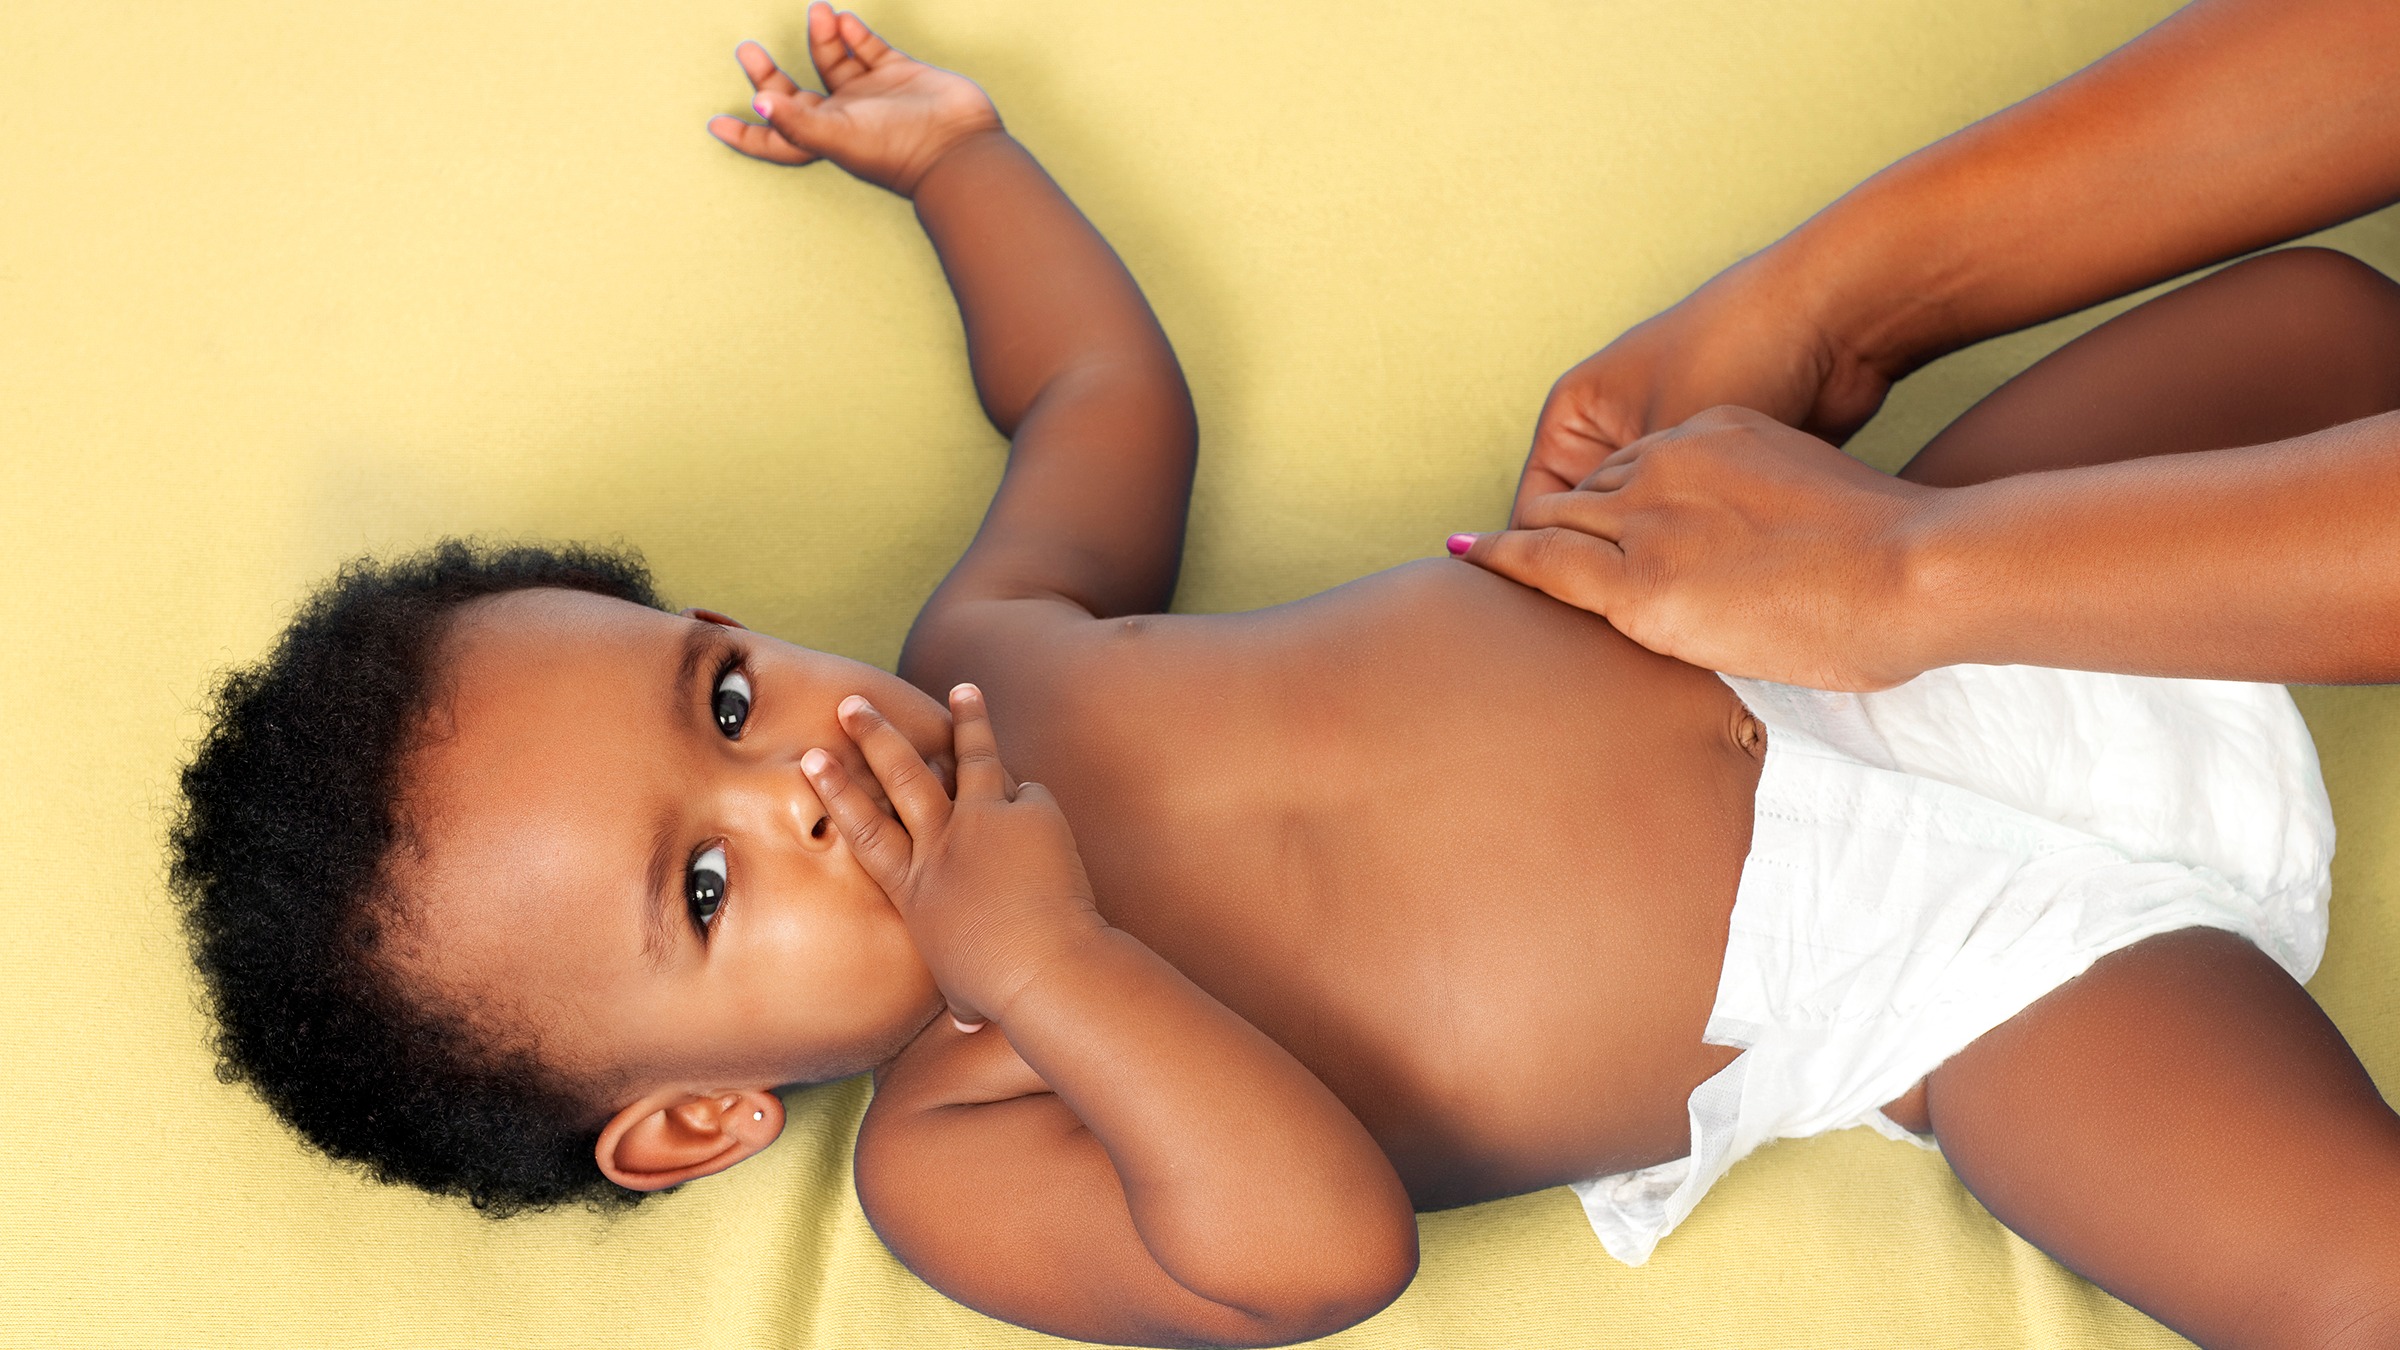 How to Treat Severe Diaper Rash in Adults?